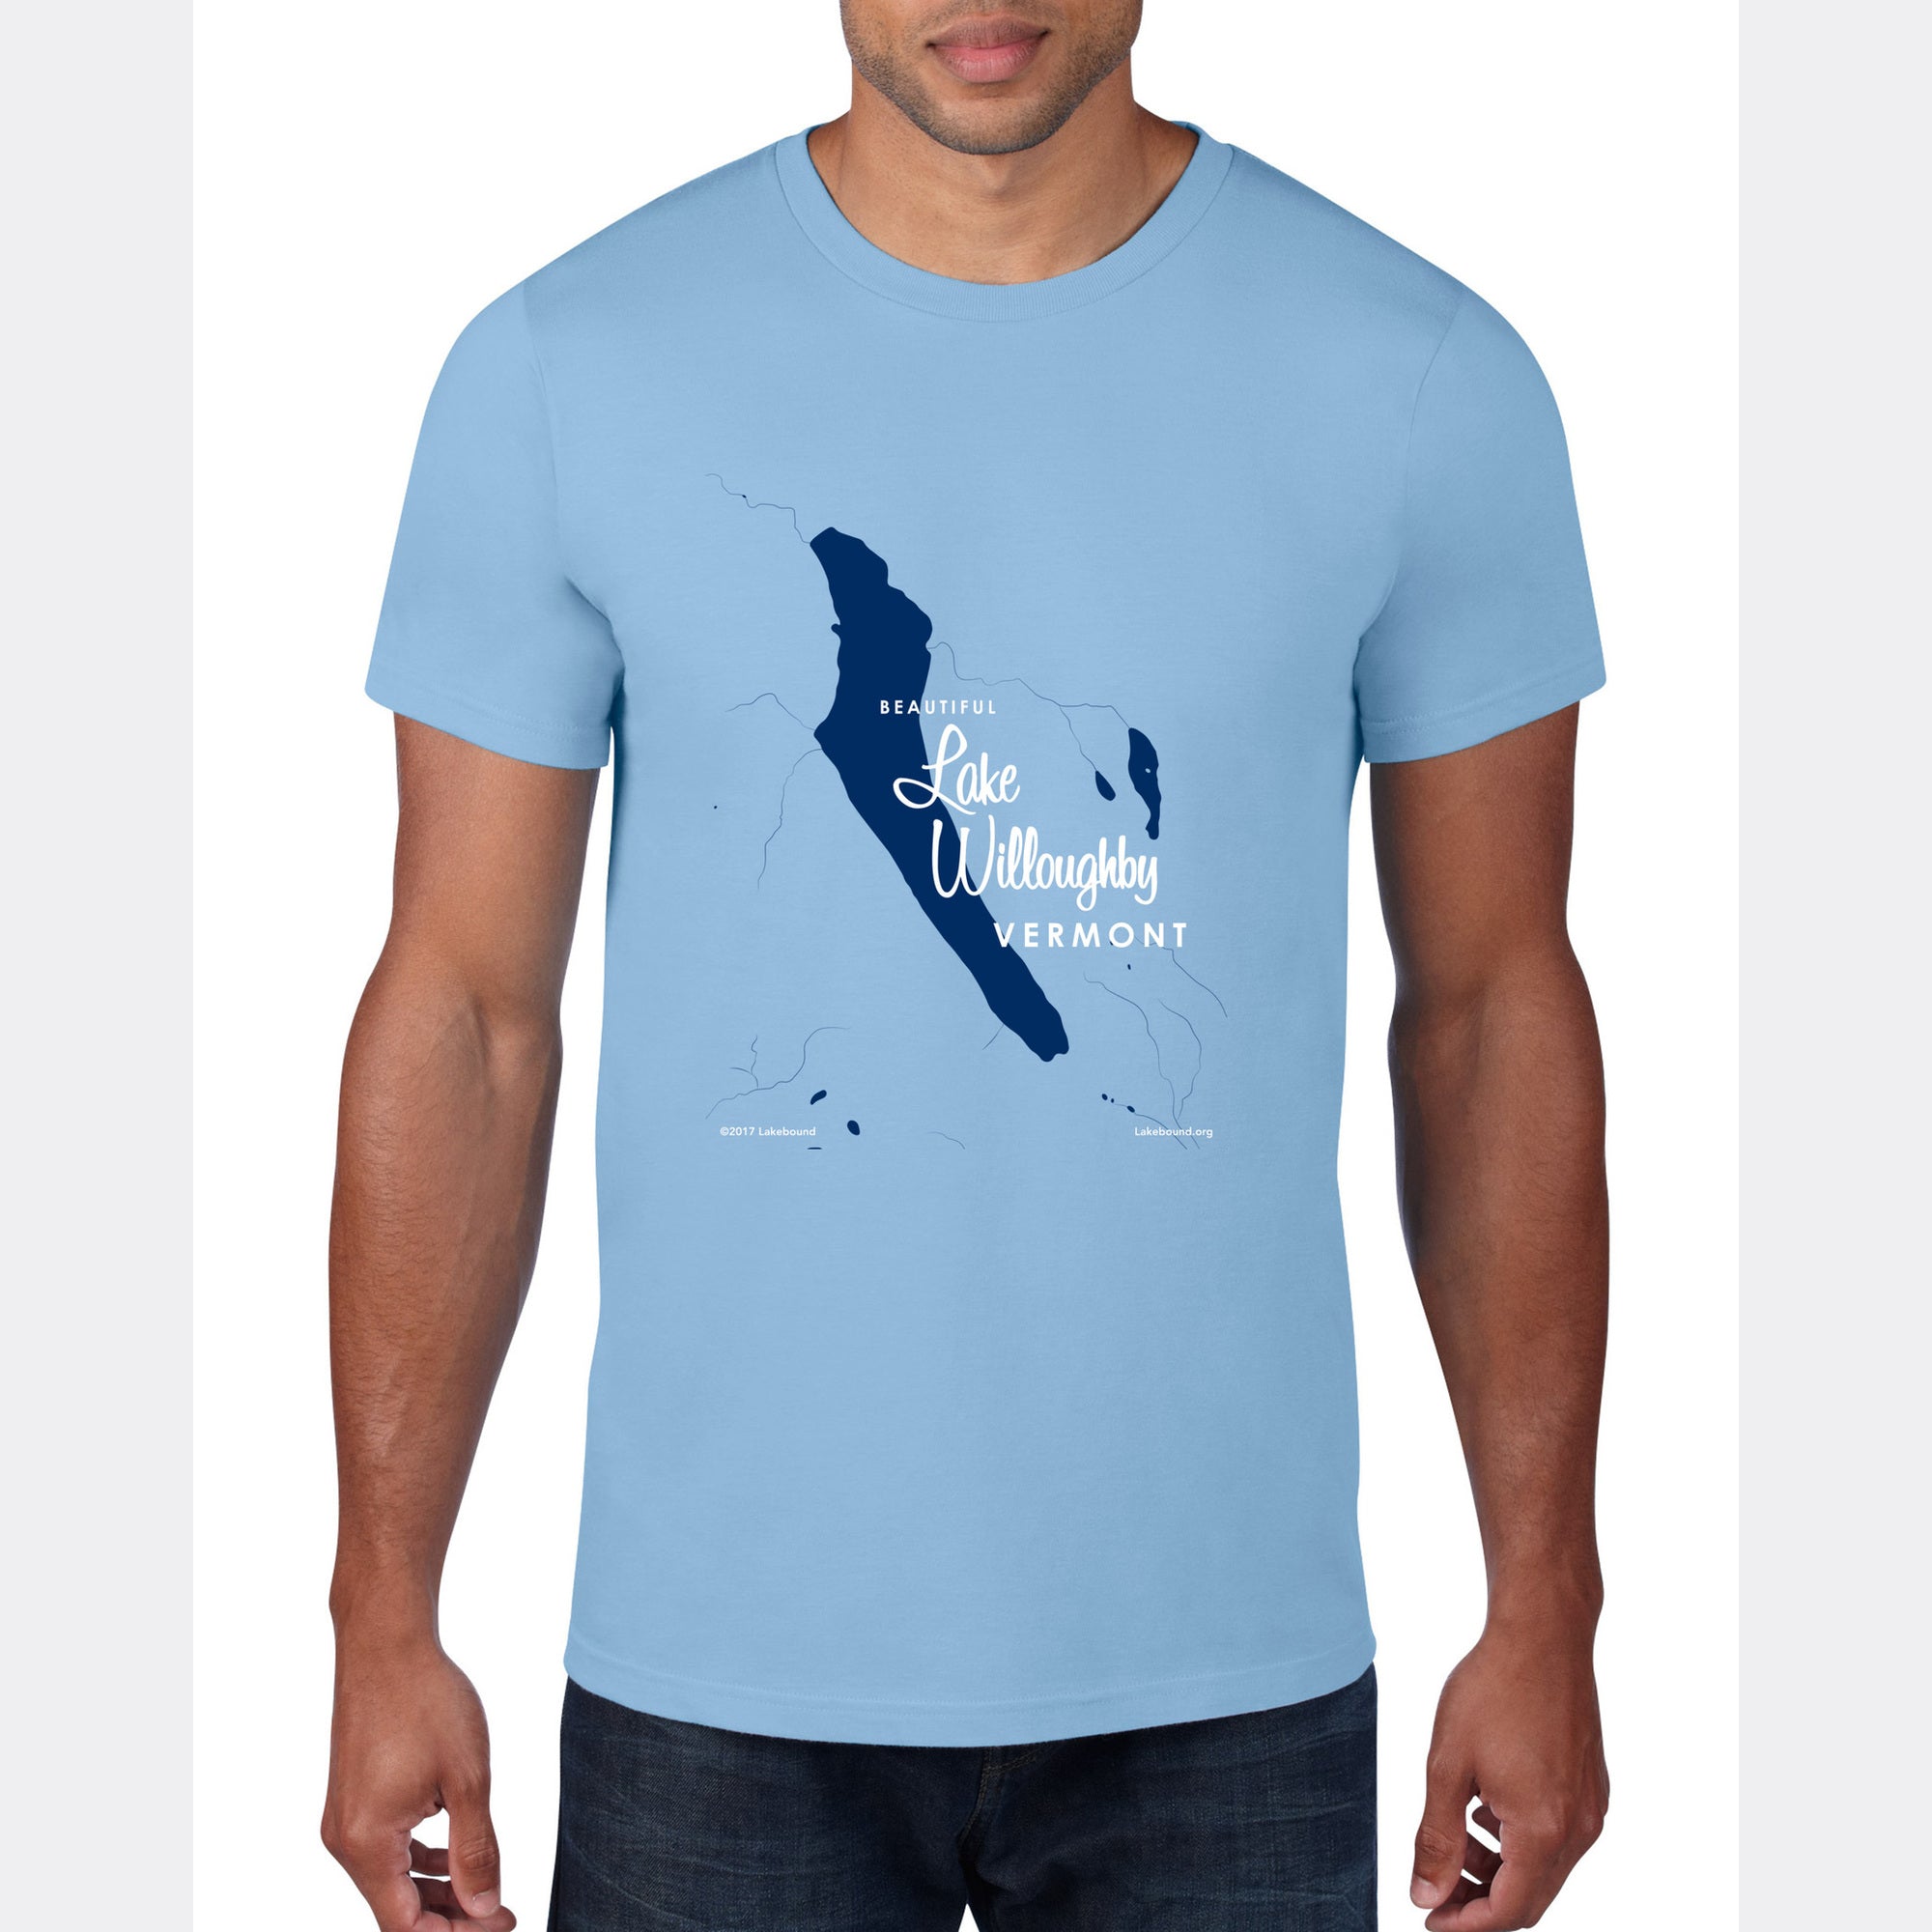 Lake Willoughby Vermont, T-Shirt